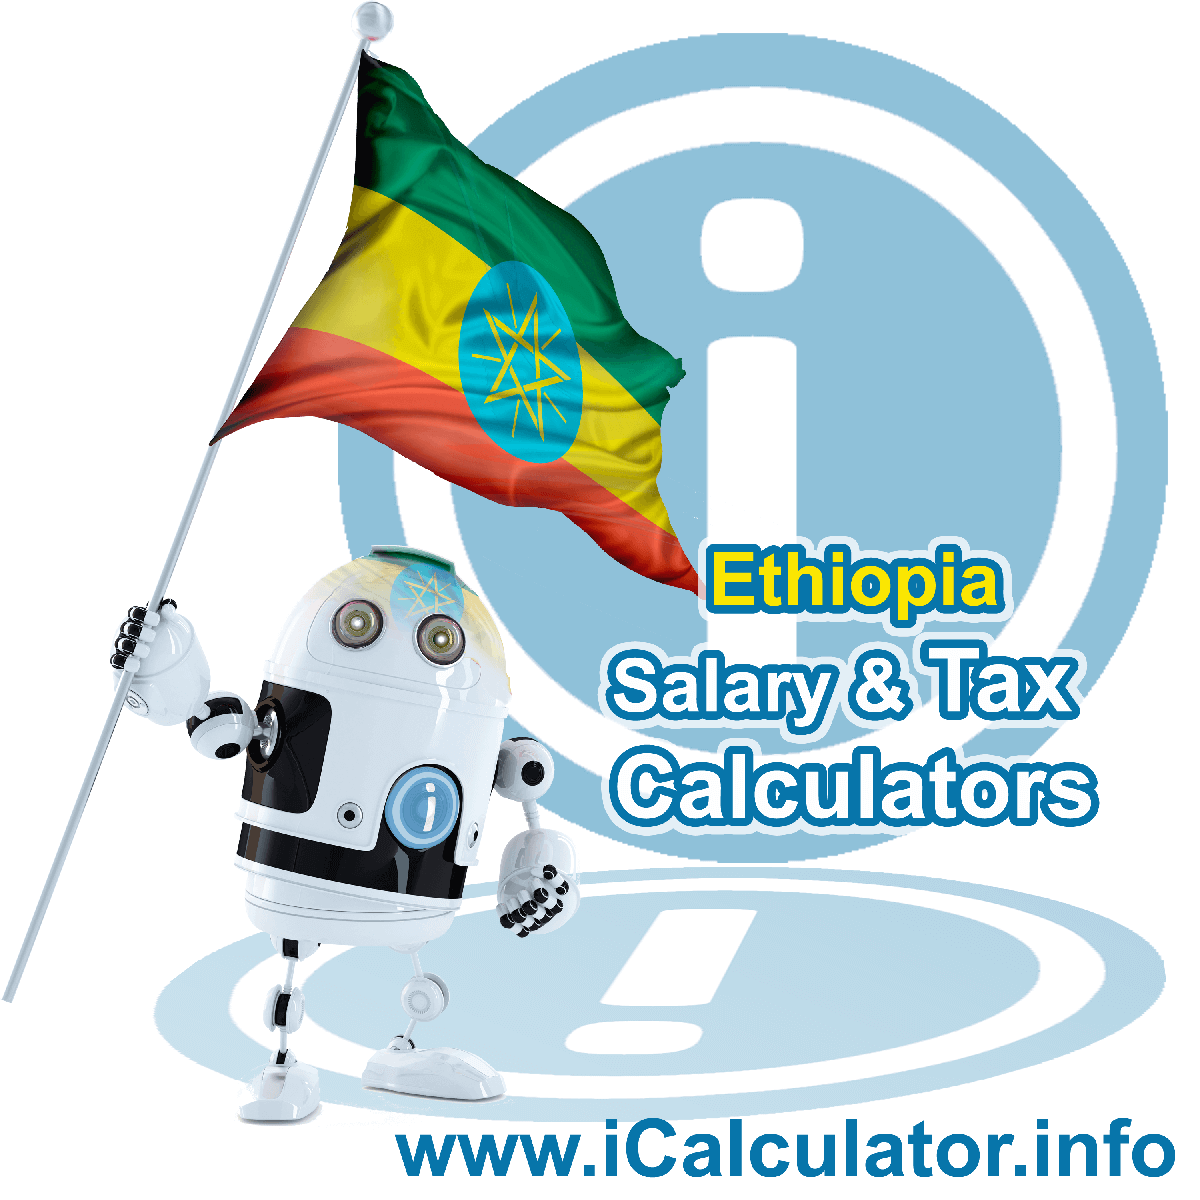 Ethiopia Salary Calculator. This image shows the Ethiopiaese flag and information relating to the tax formula for the Ethiopia Tax Calculator